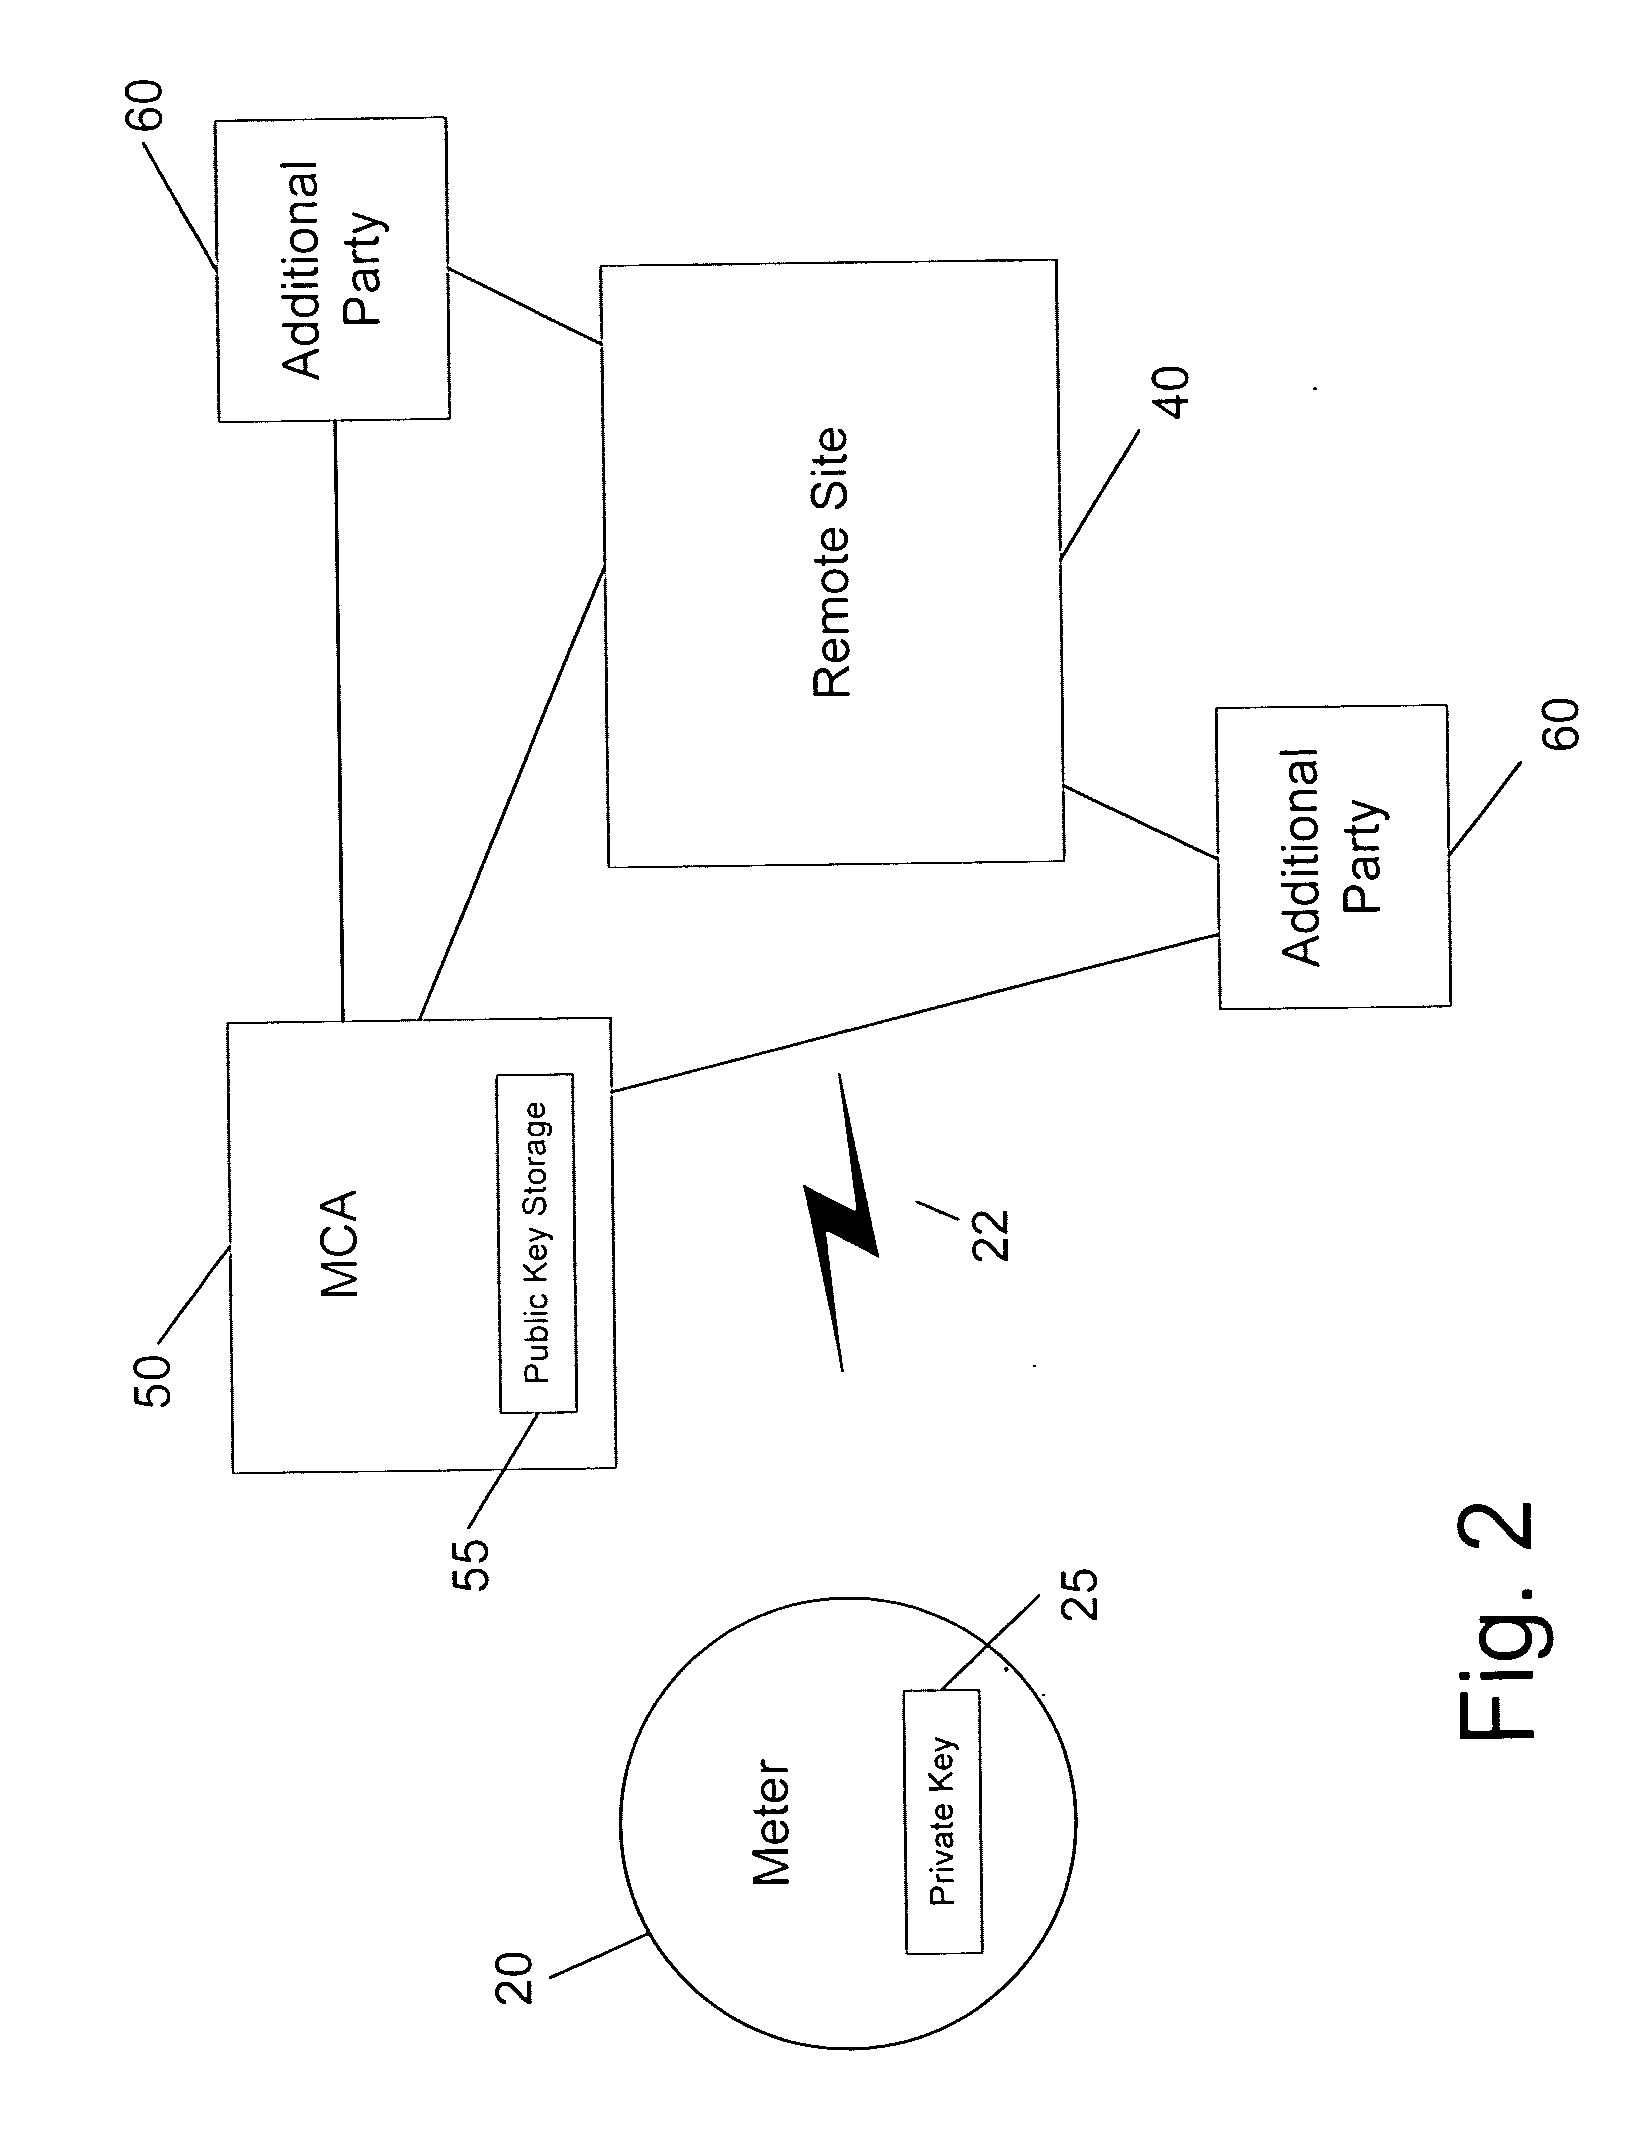 Secure and authenticated delivery of data from an automated meter reading system